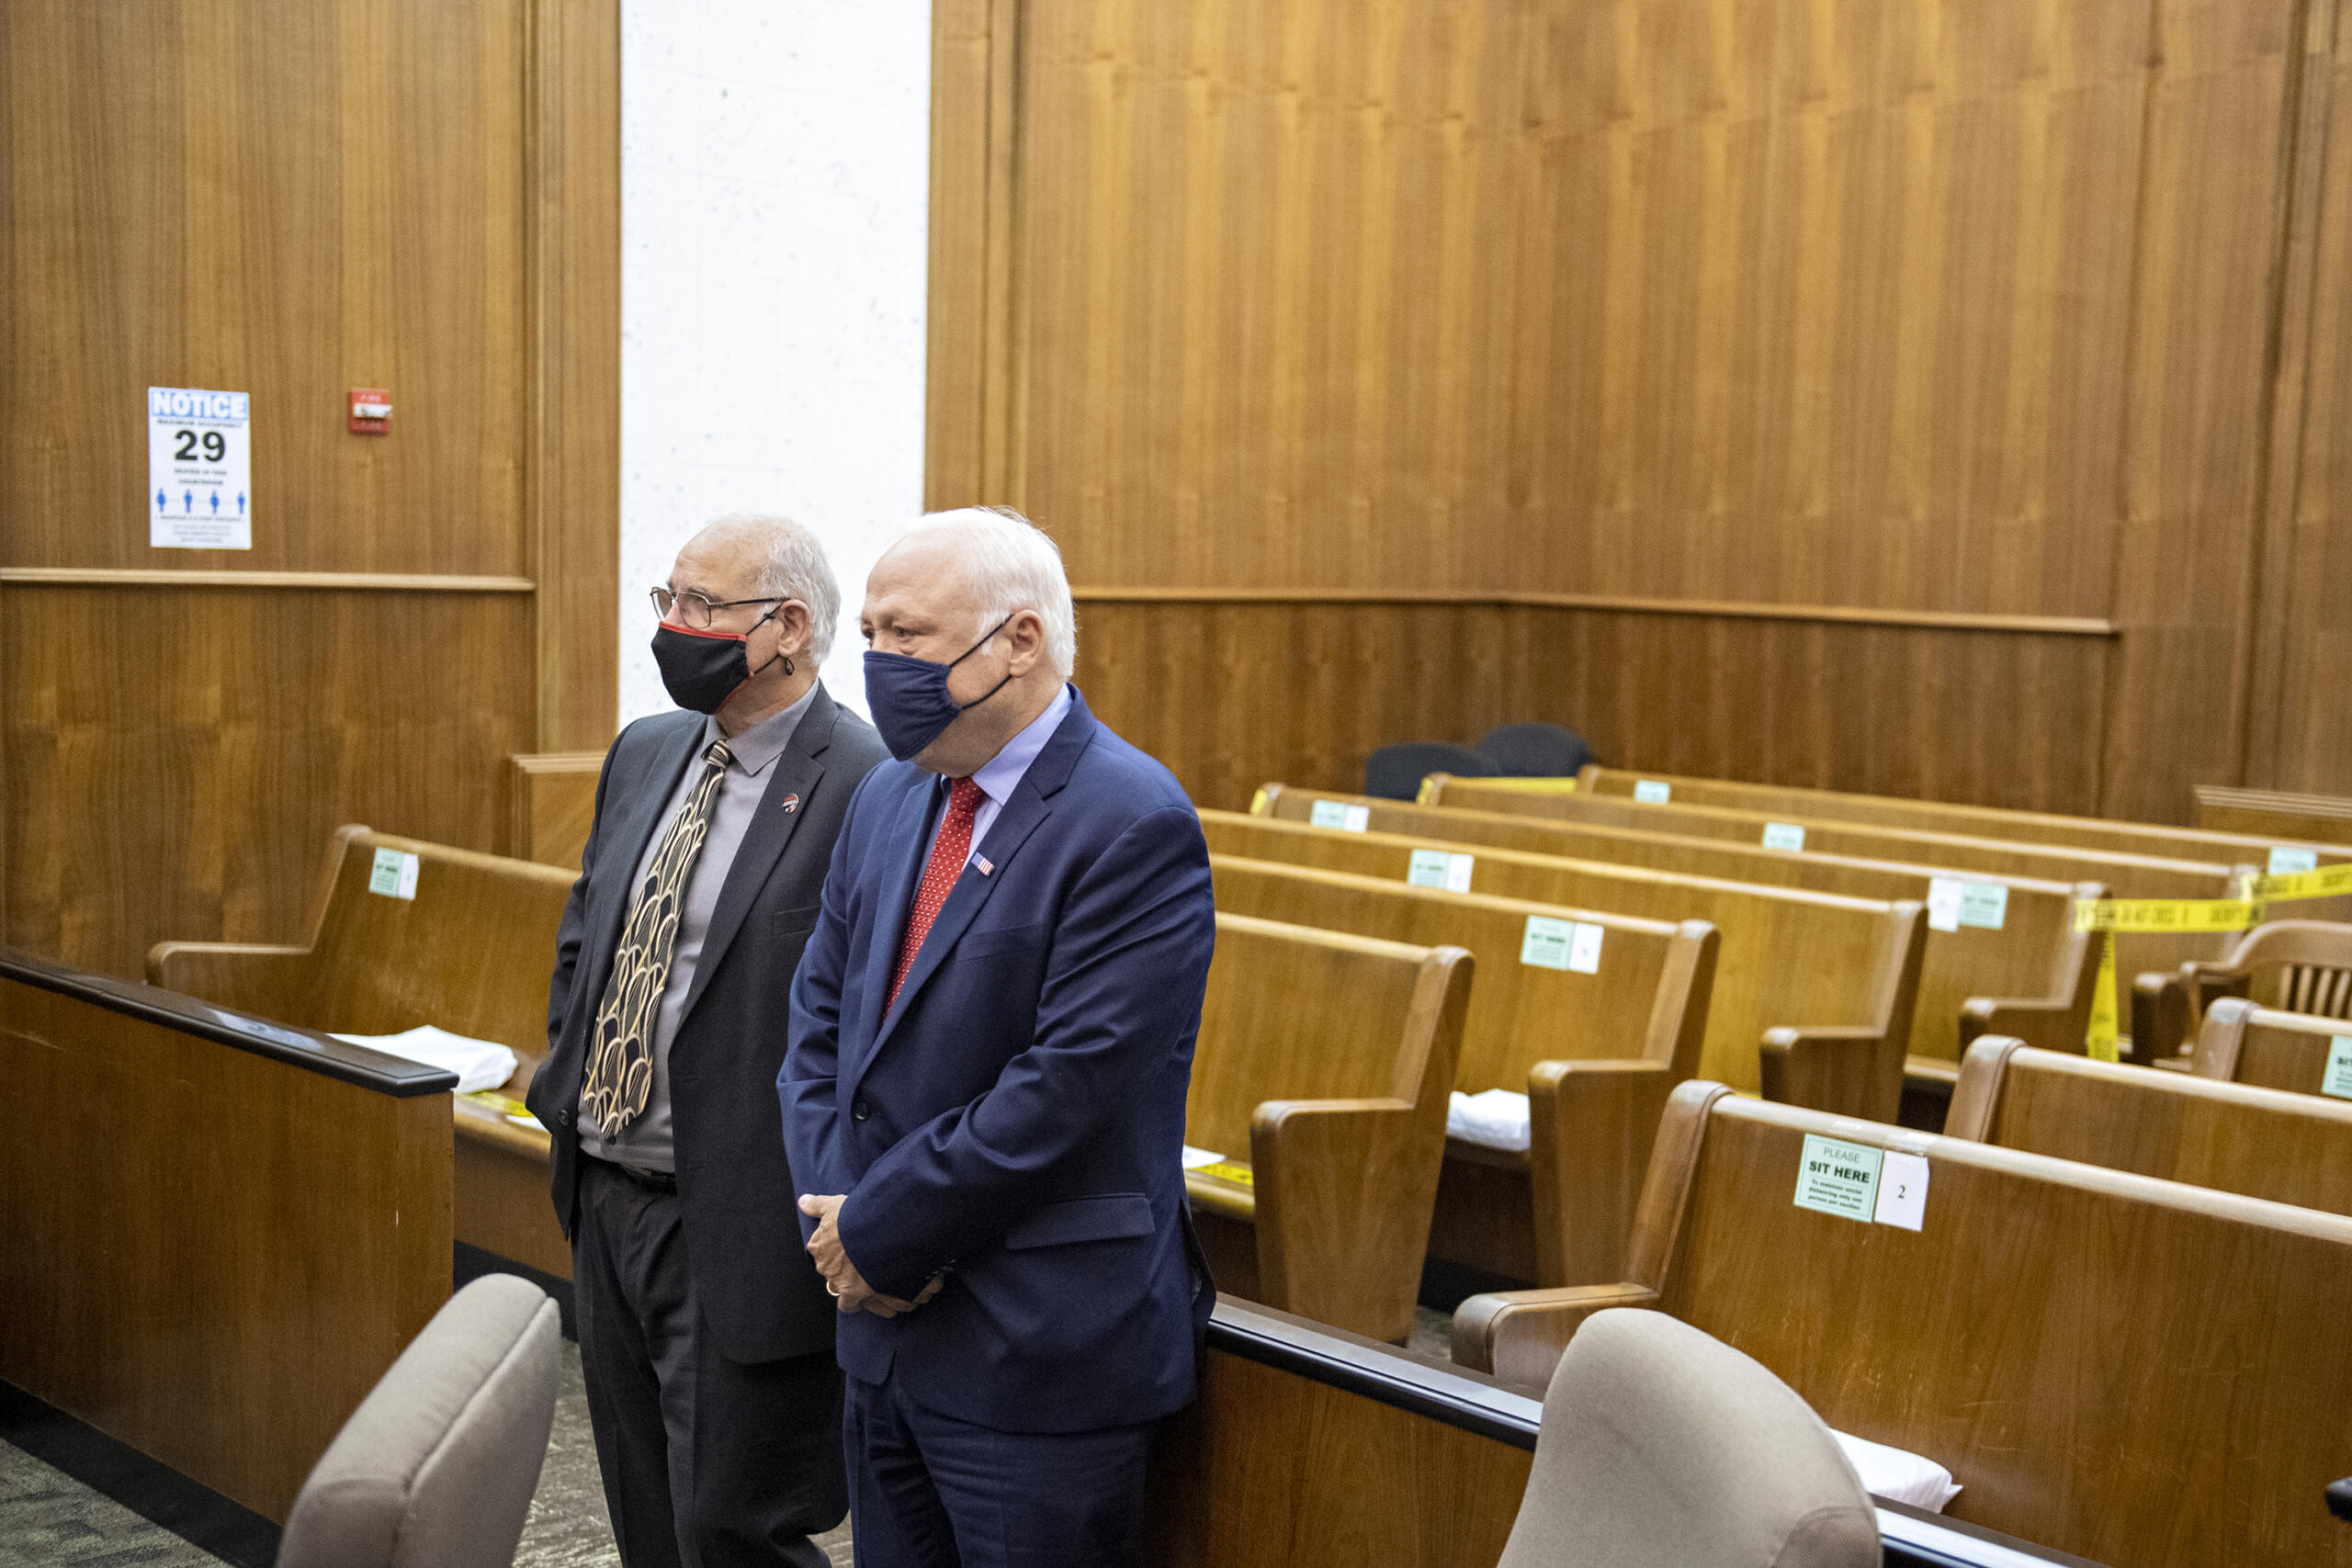 Plaintiffs Christopher Clifford, left, and Don Benton stand after the verdict in their lawsuit trial in a nearly empty courtroom at the Clark County Courthouse on Thursday morning, May 20, 2021.